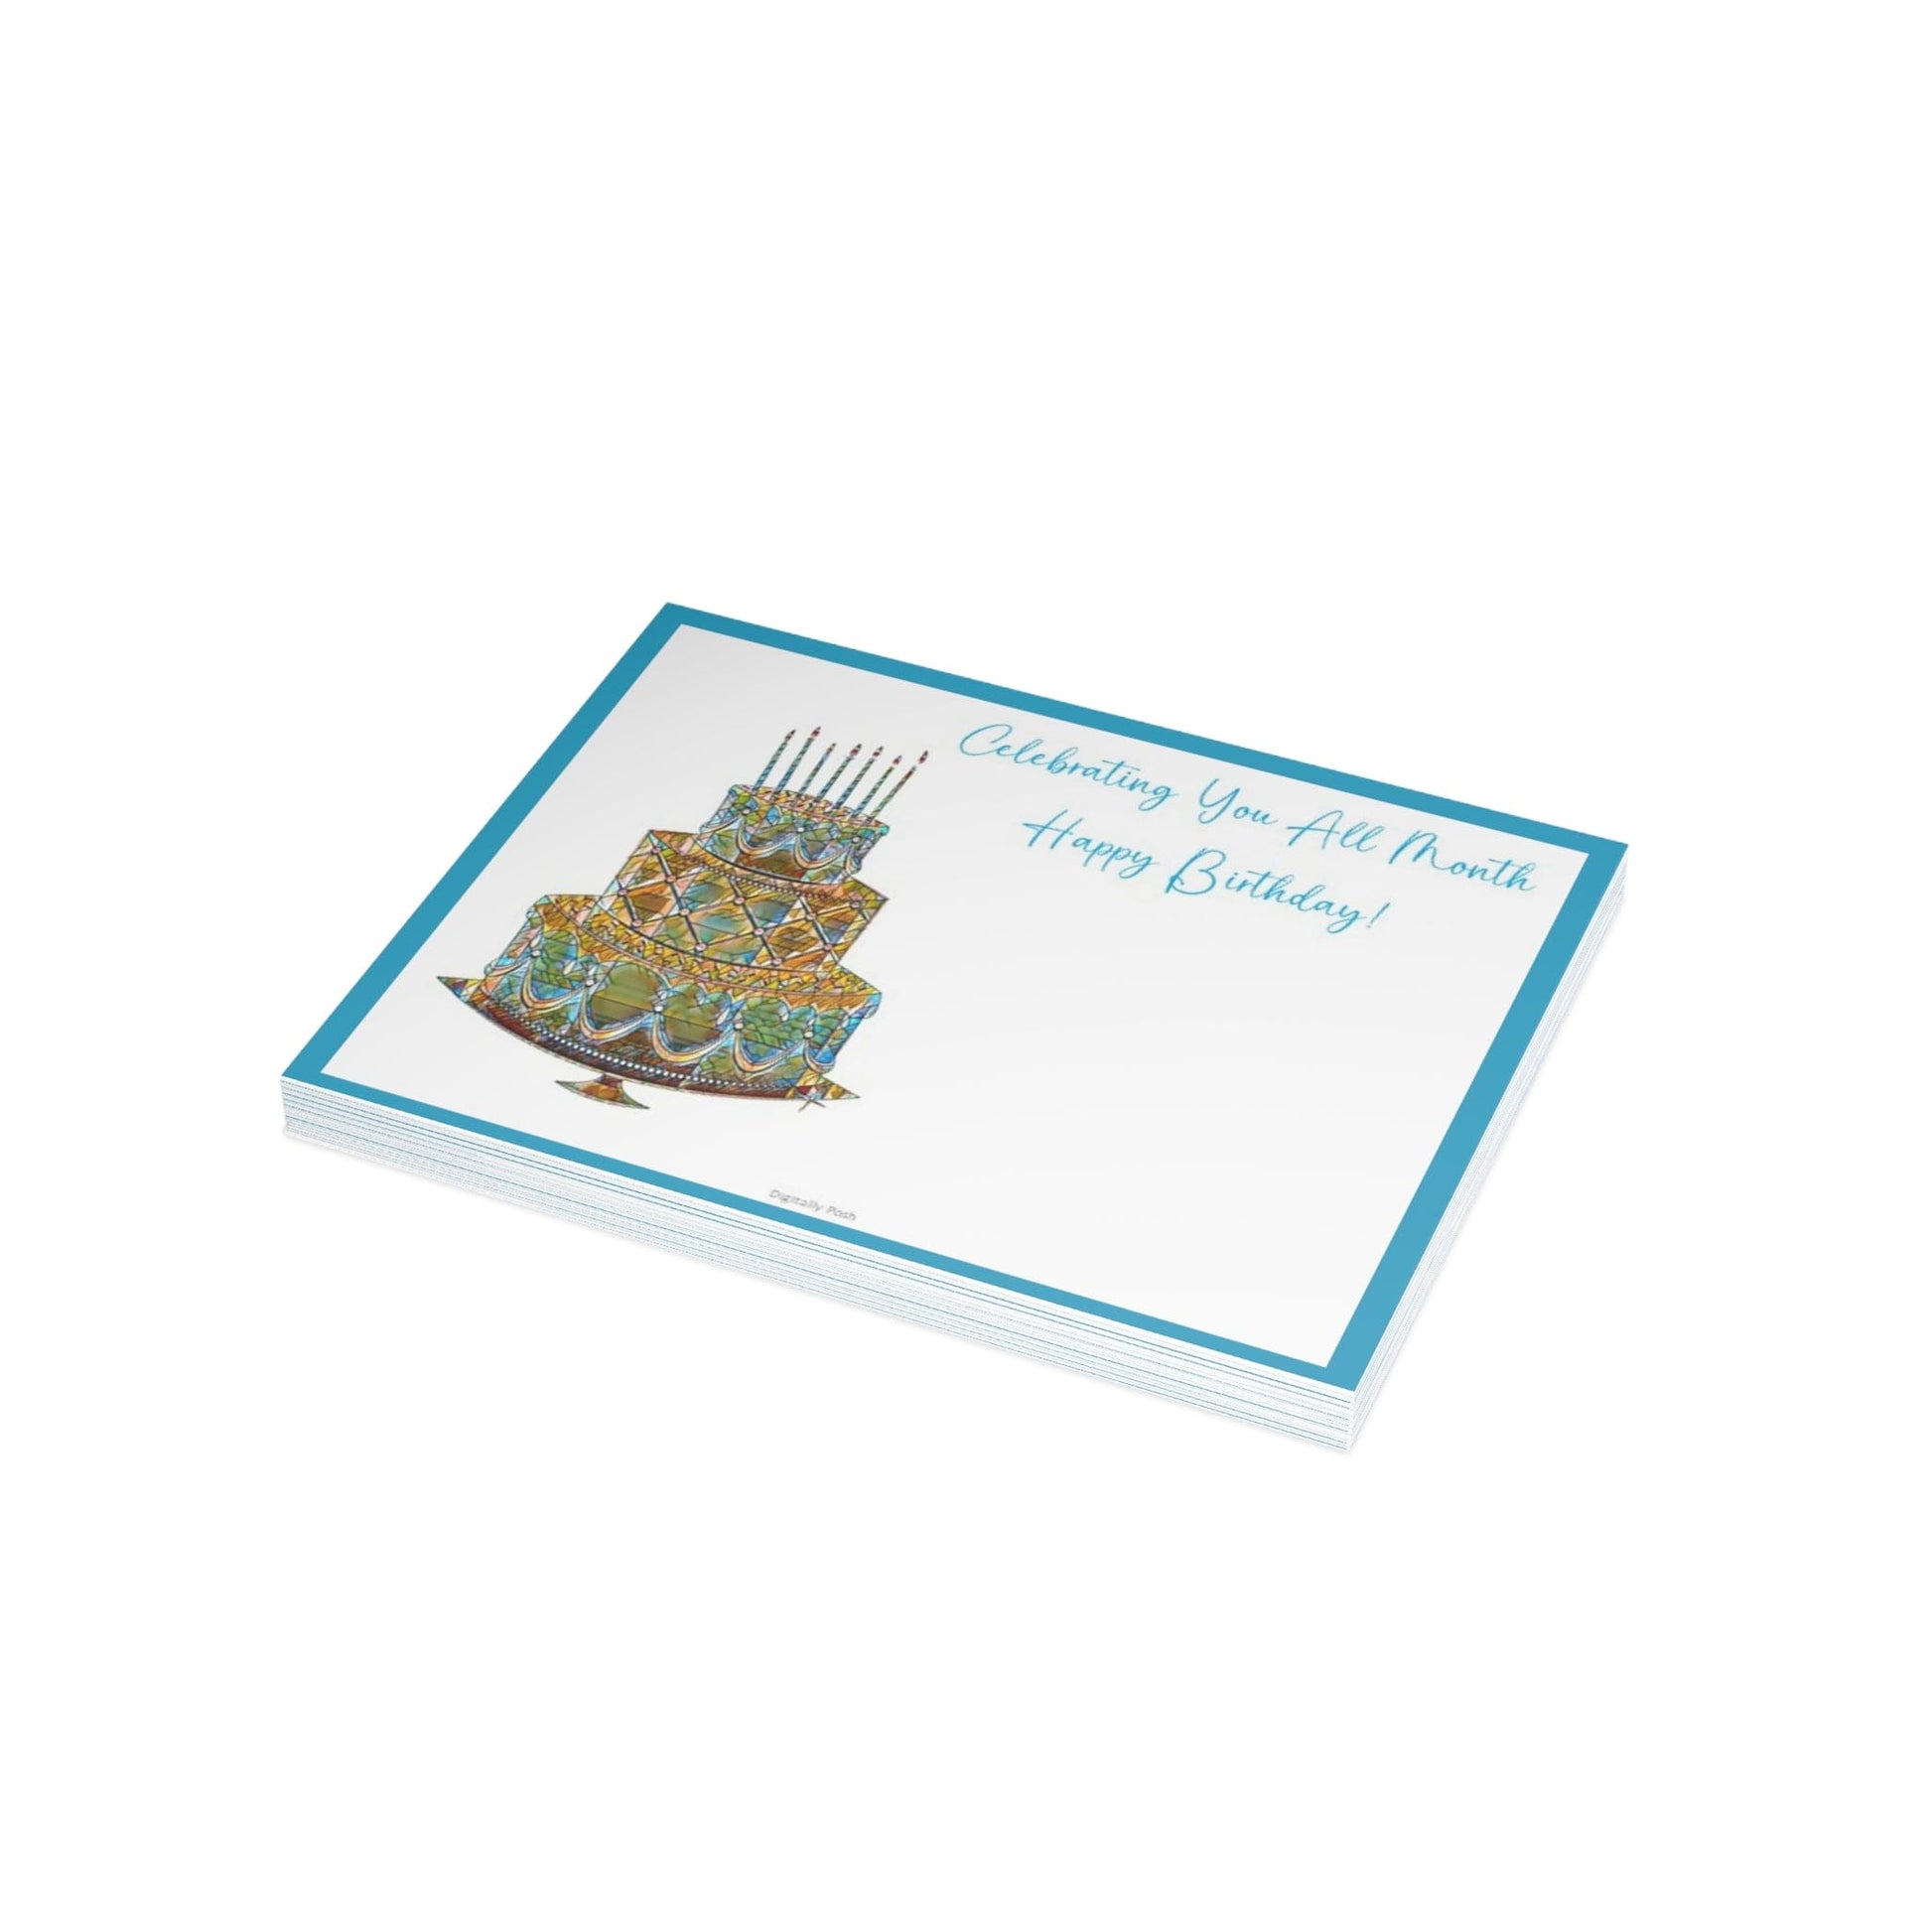 Personalized Note Card: Add a Personal Touch with Customized Stationery for Every Occasion. Celebrating You Notecard Bundles (envelopes included)